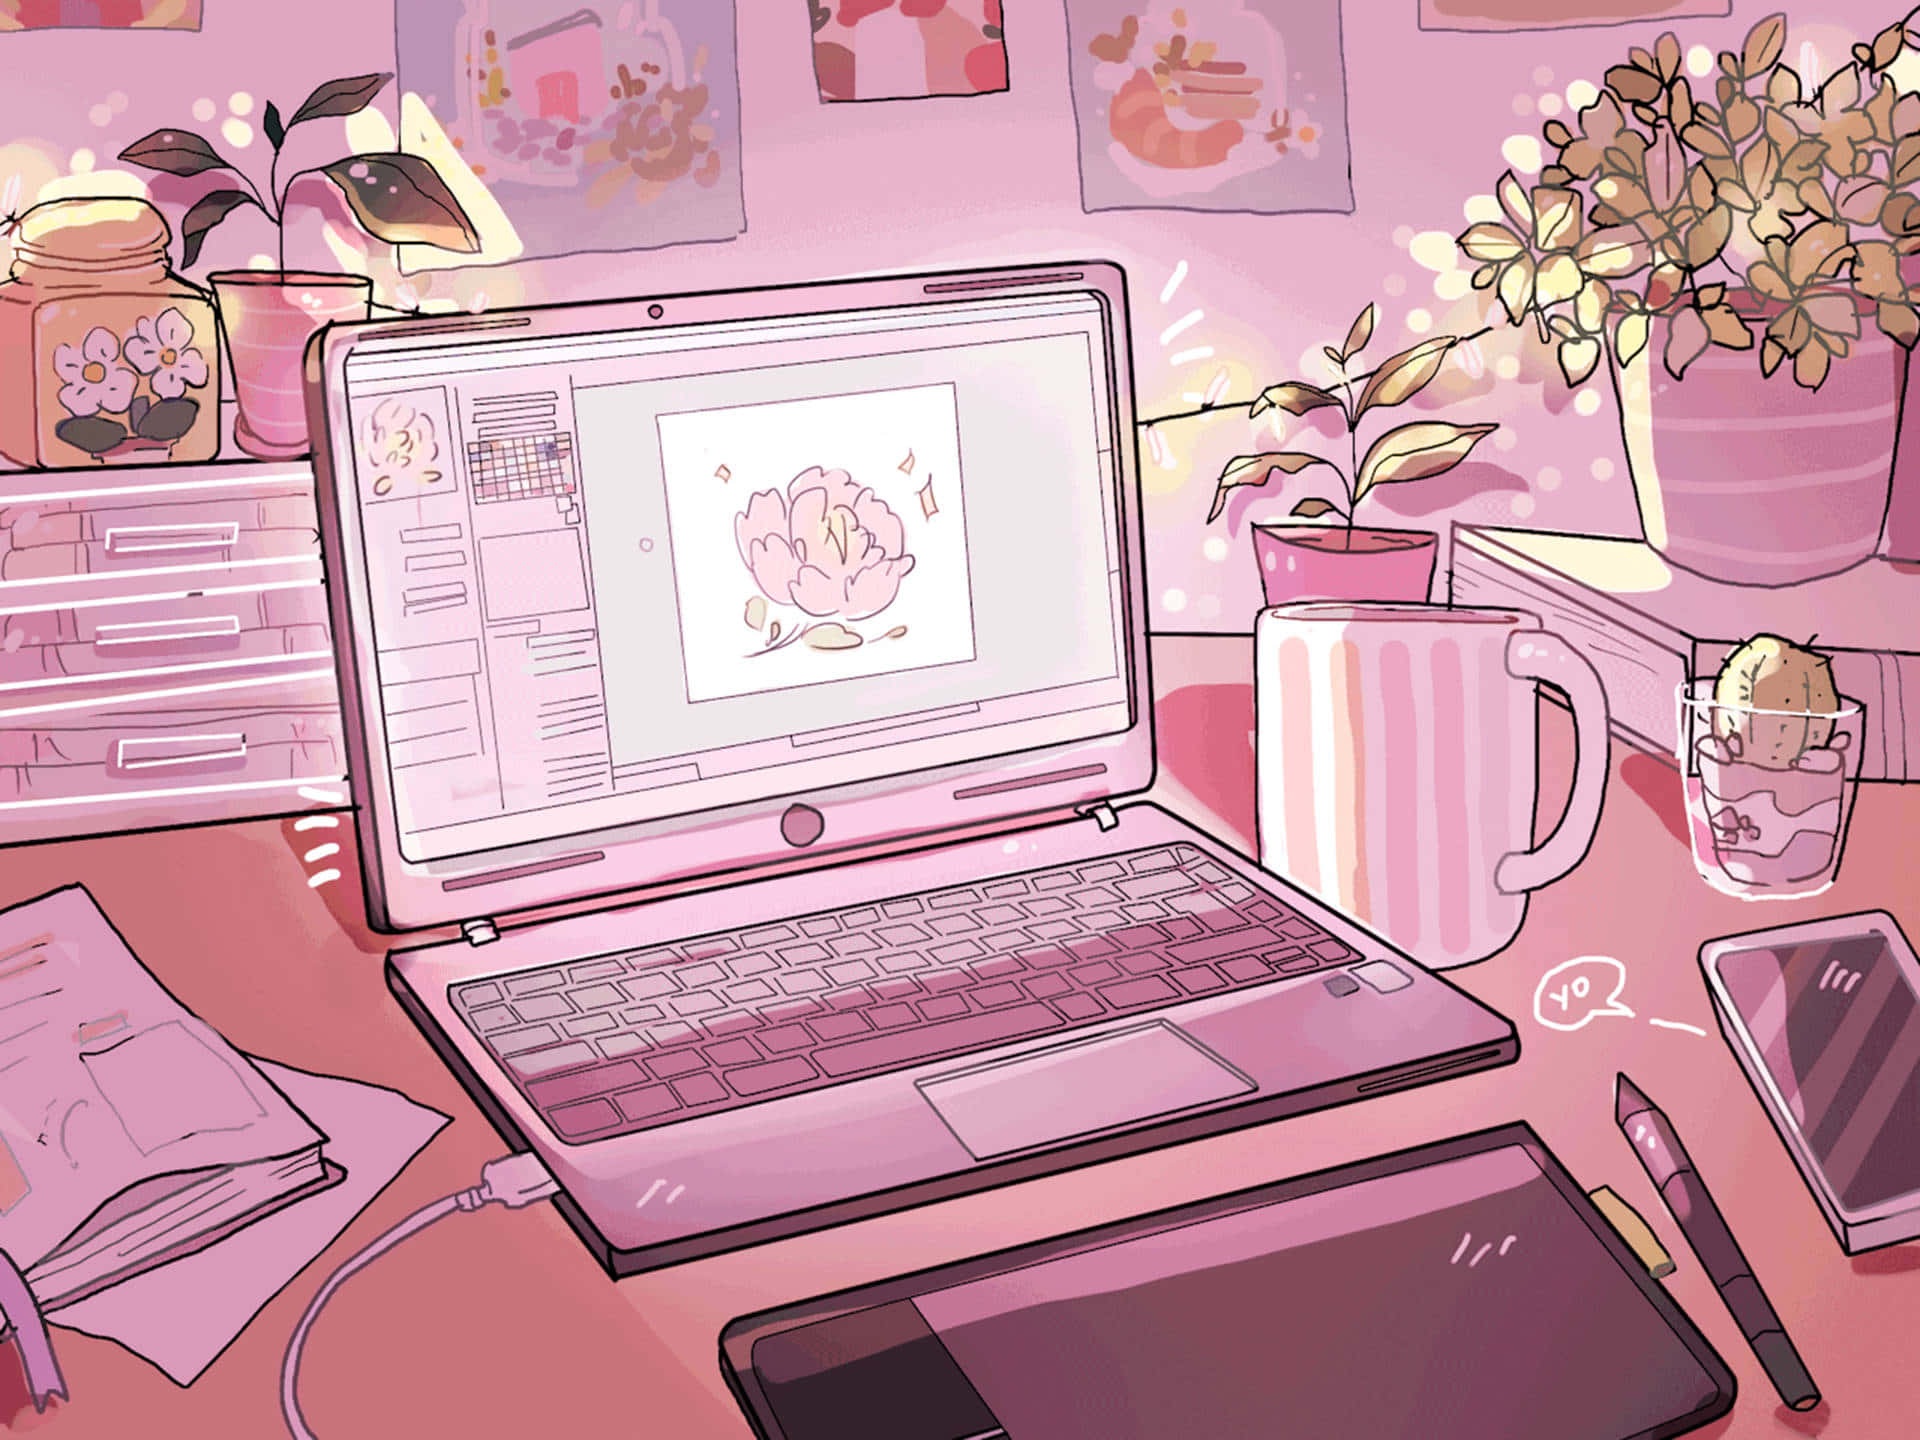 A Laptop On A Desk With A Flower On It